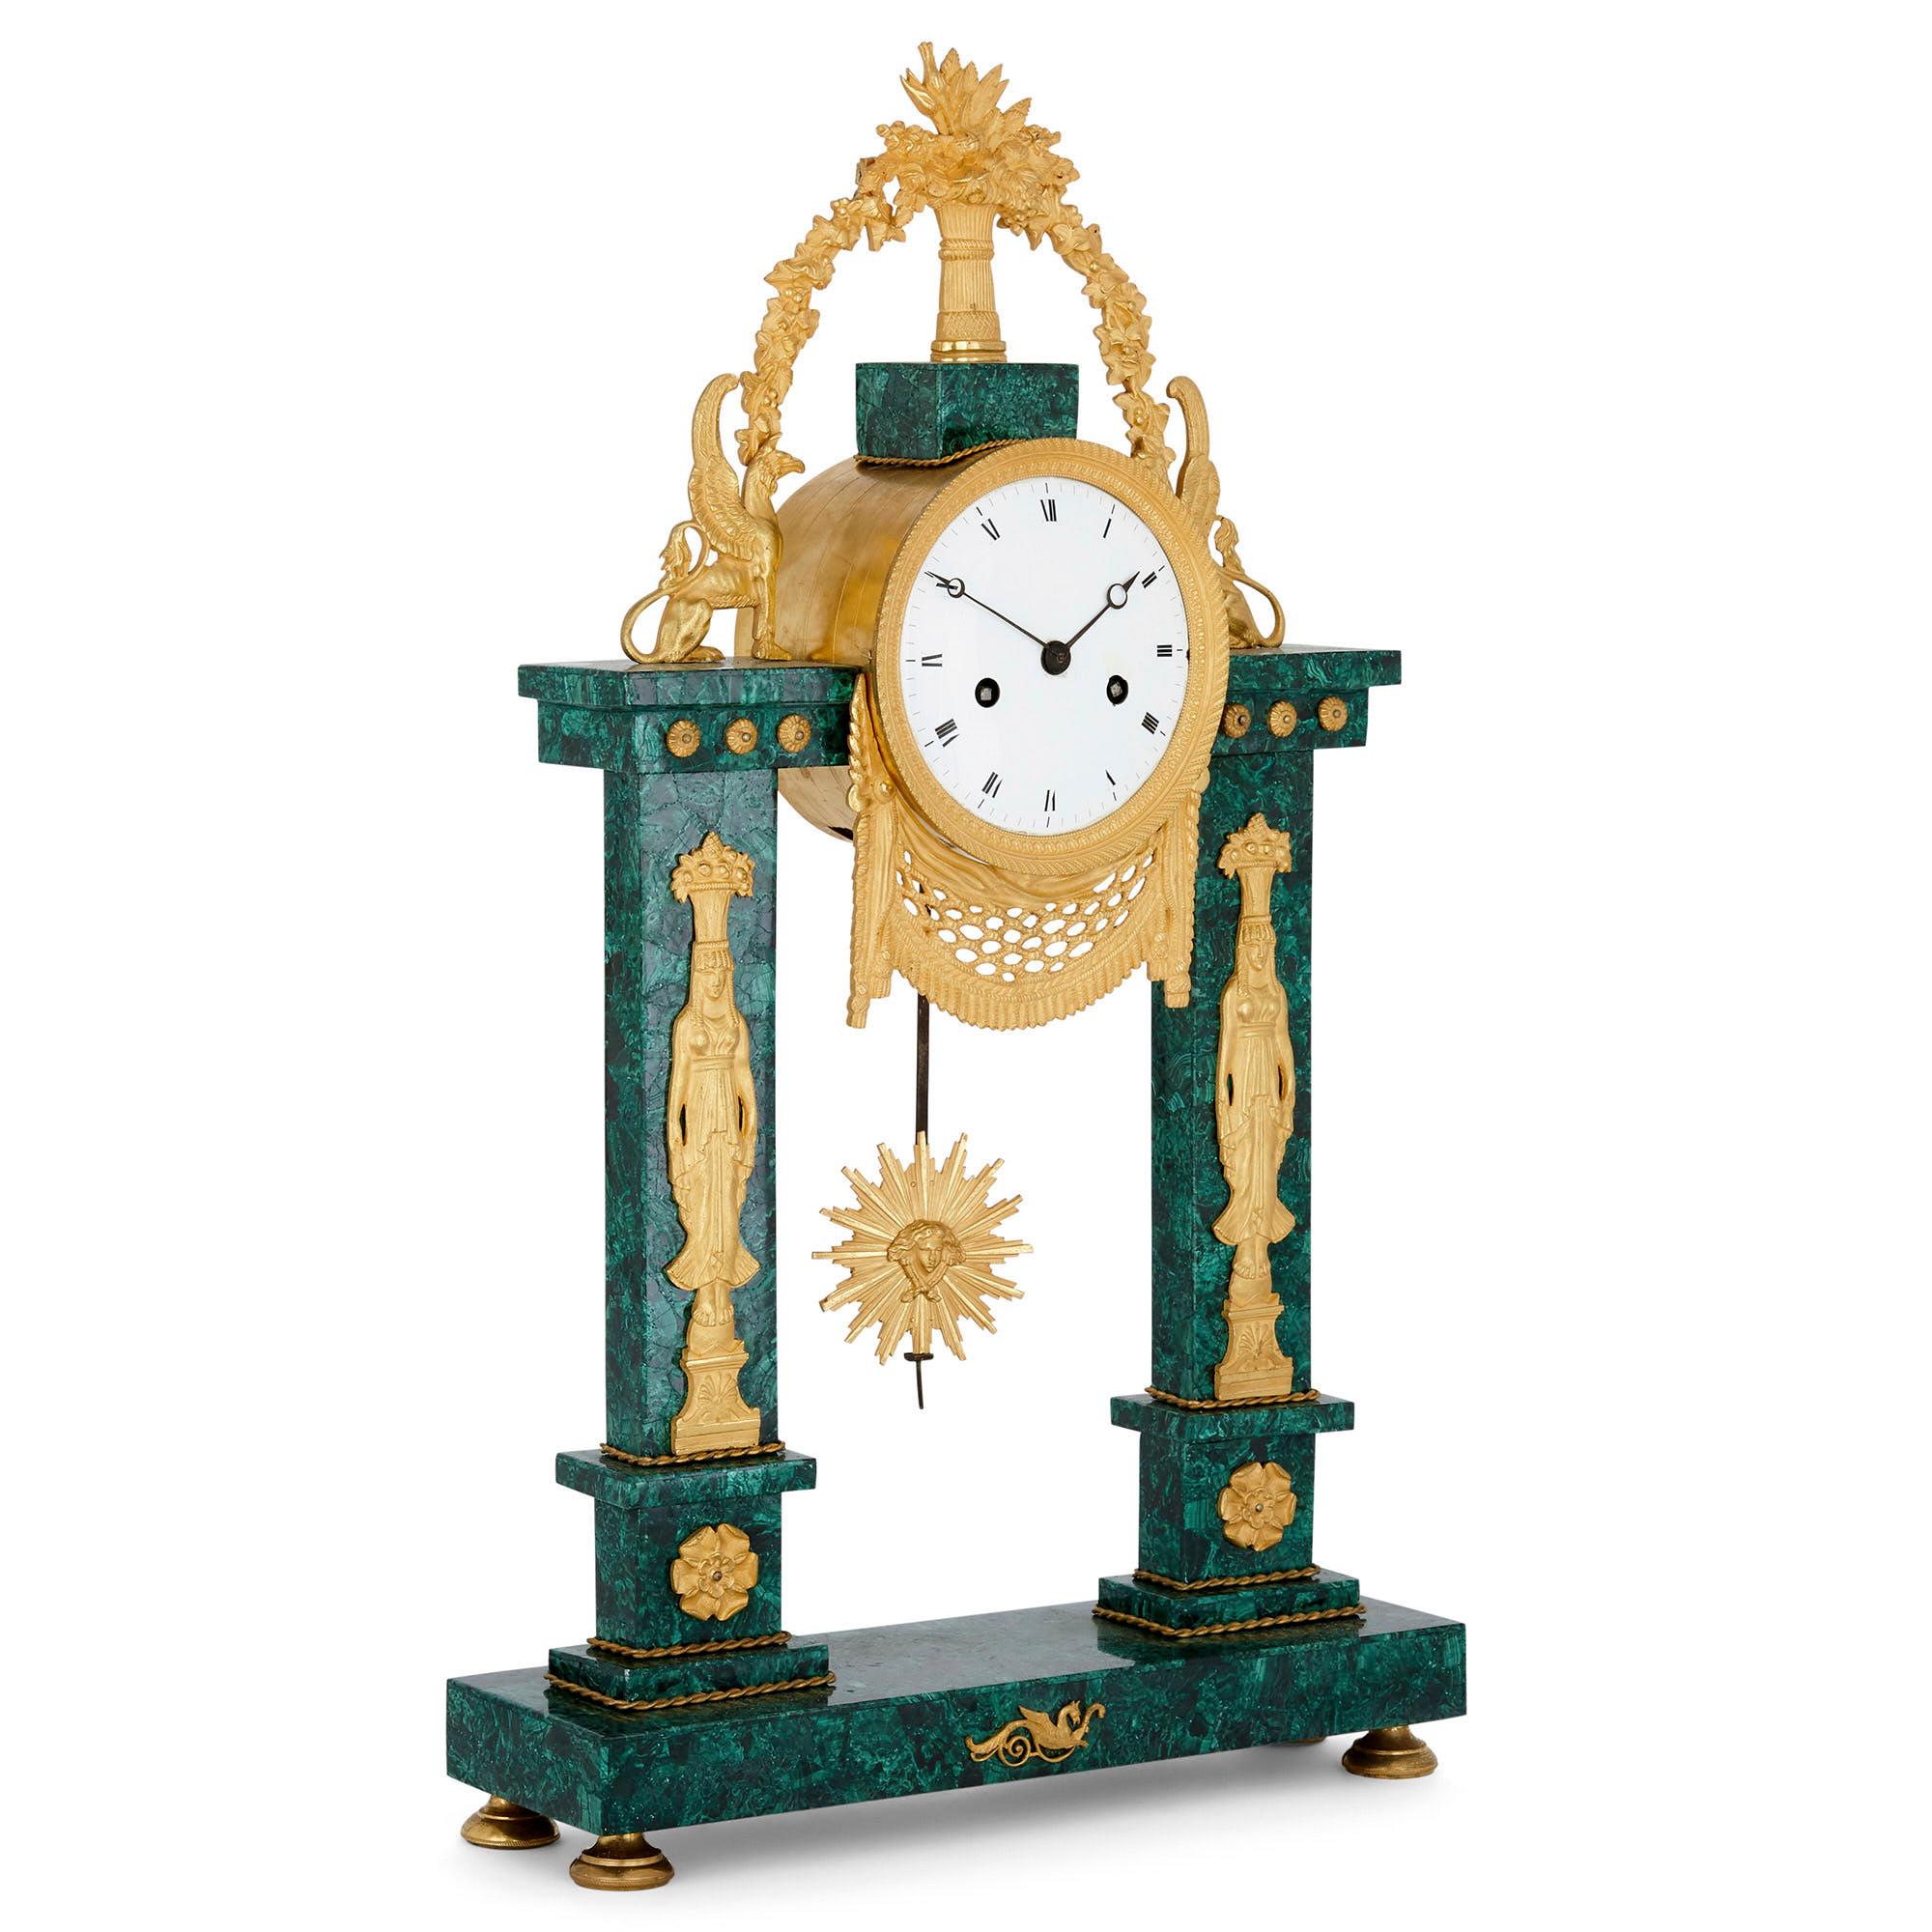 Neoclassical Louis XVI period French mantel clock
French, late 18th century
Dimensions: Height 56cm, width 33cm, depth 9.5cm

Crafted from ormolu and a later malachite veneer, this refined Louis XVI period mantel clock is designed in a